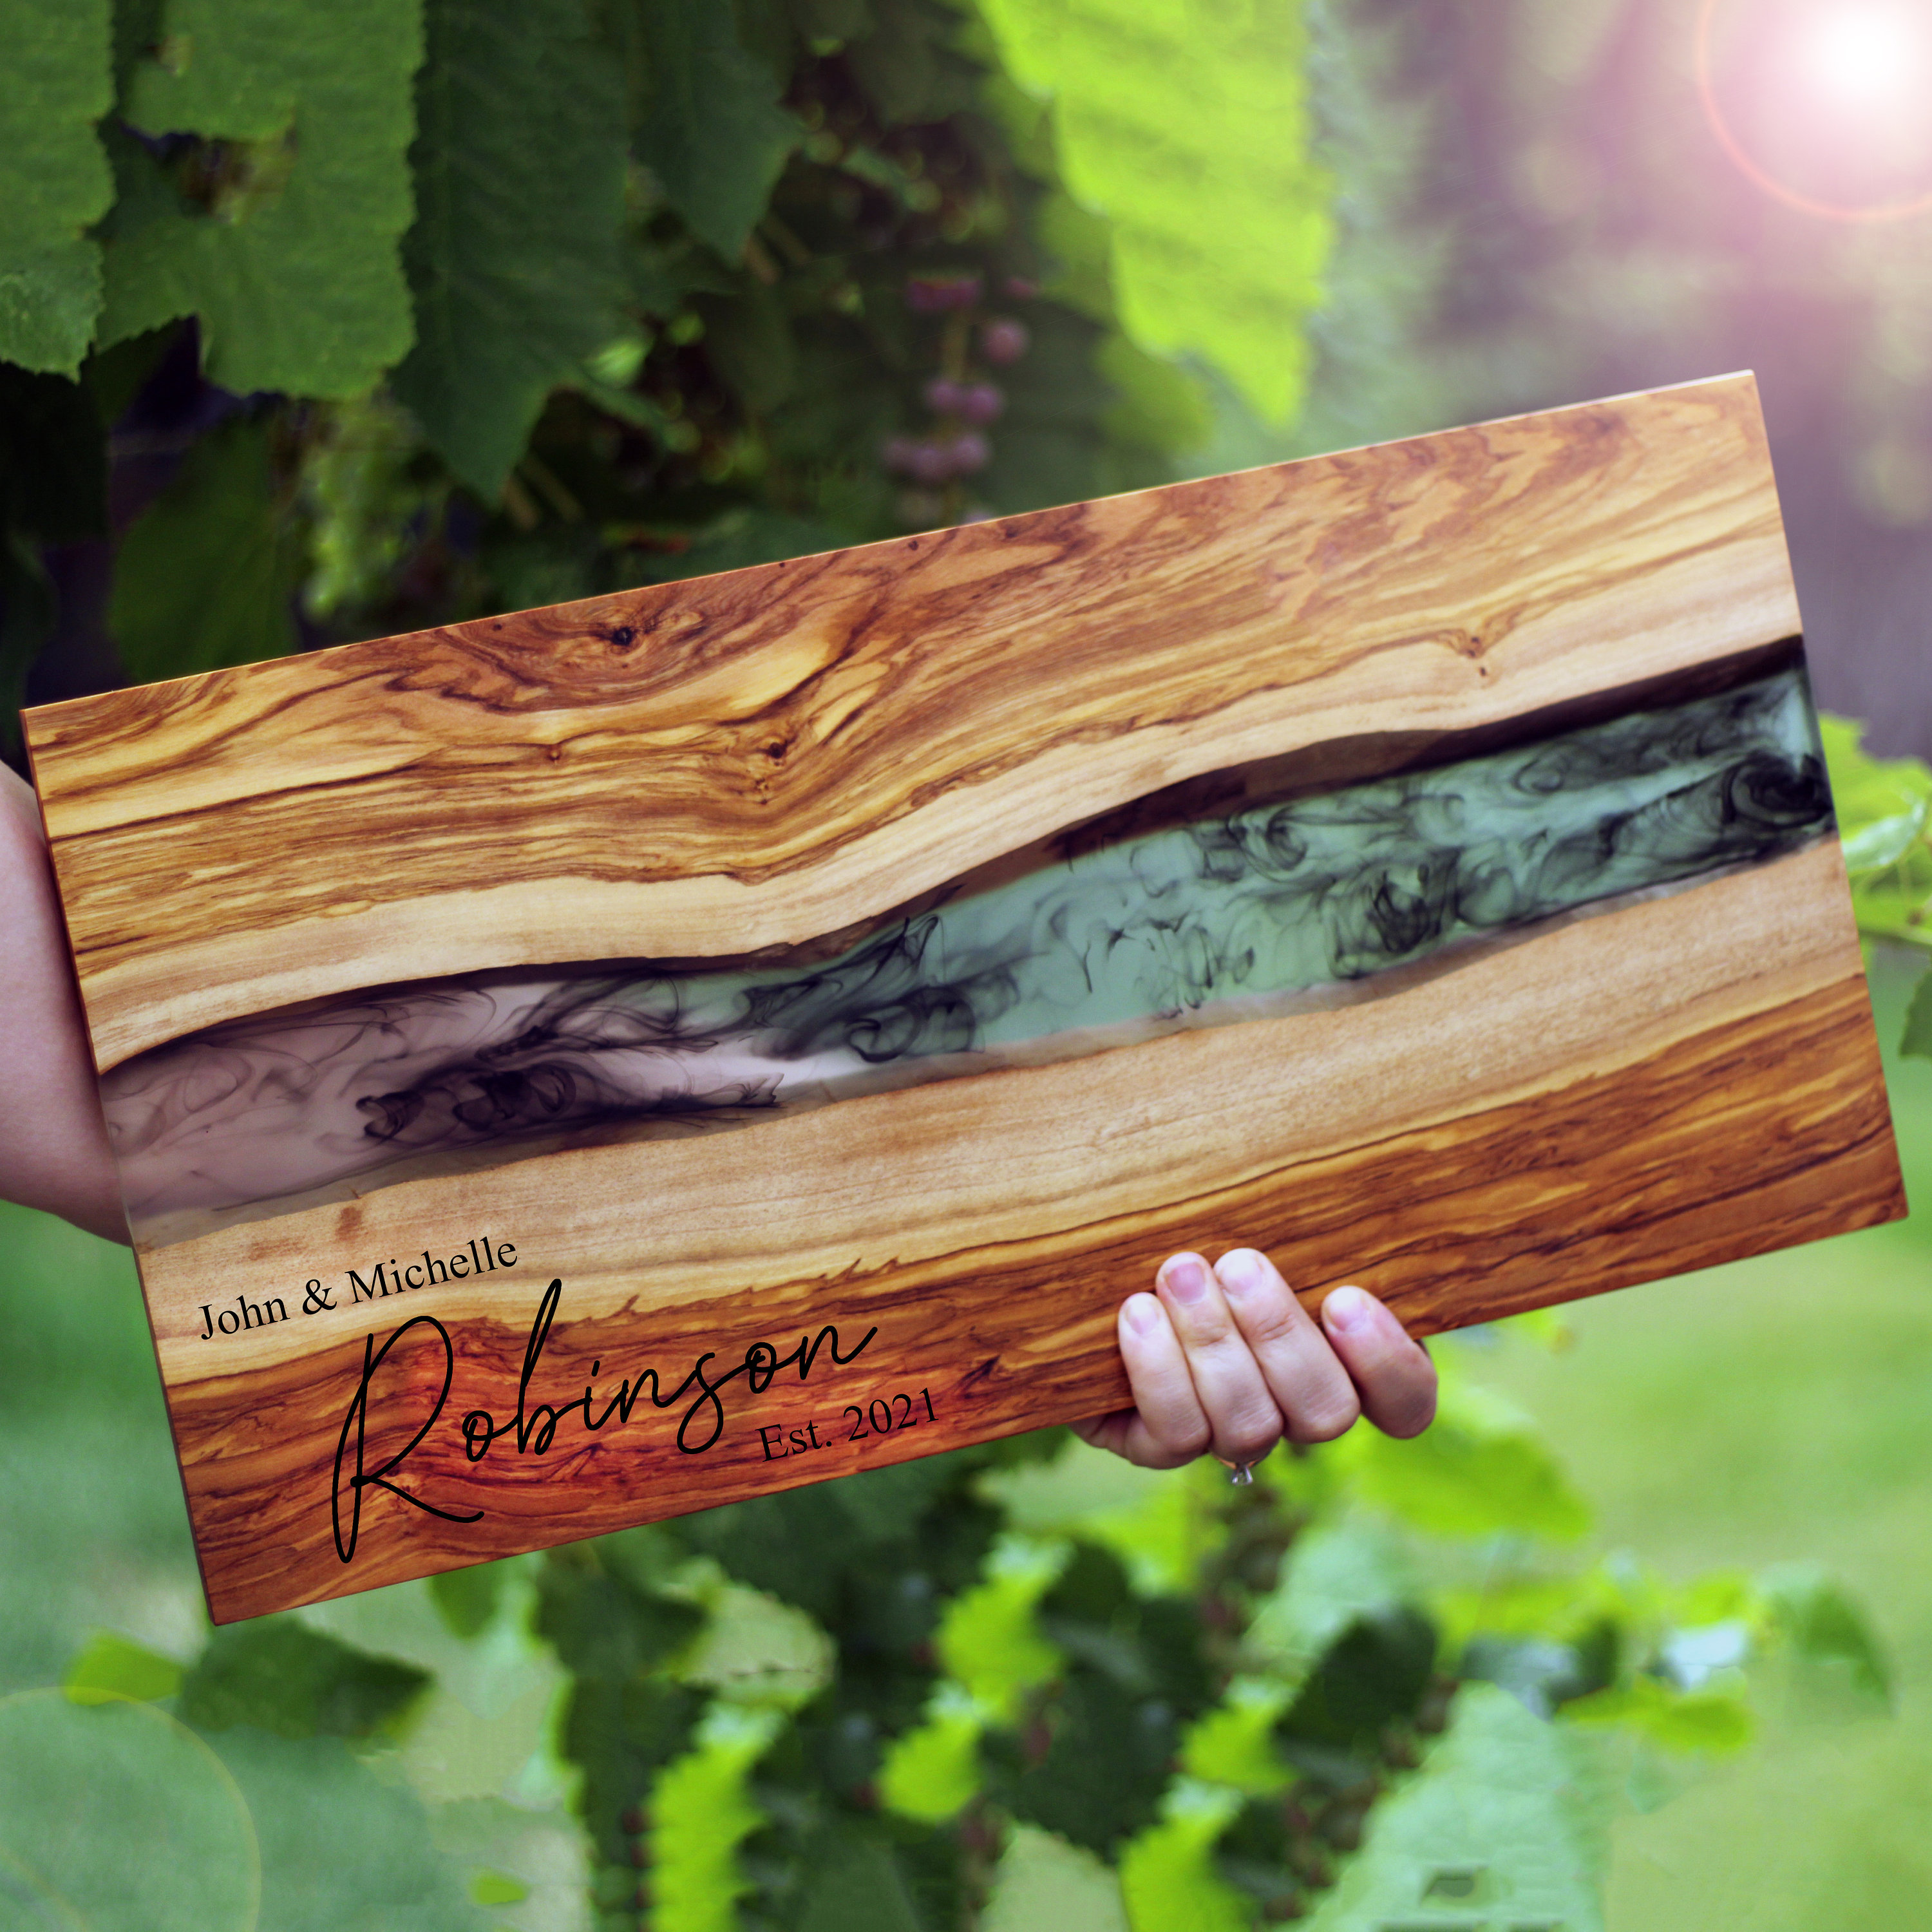 Olive wood - Set of 2 Olive Wood cutting boards with handle – Unik